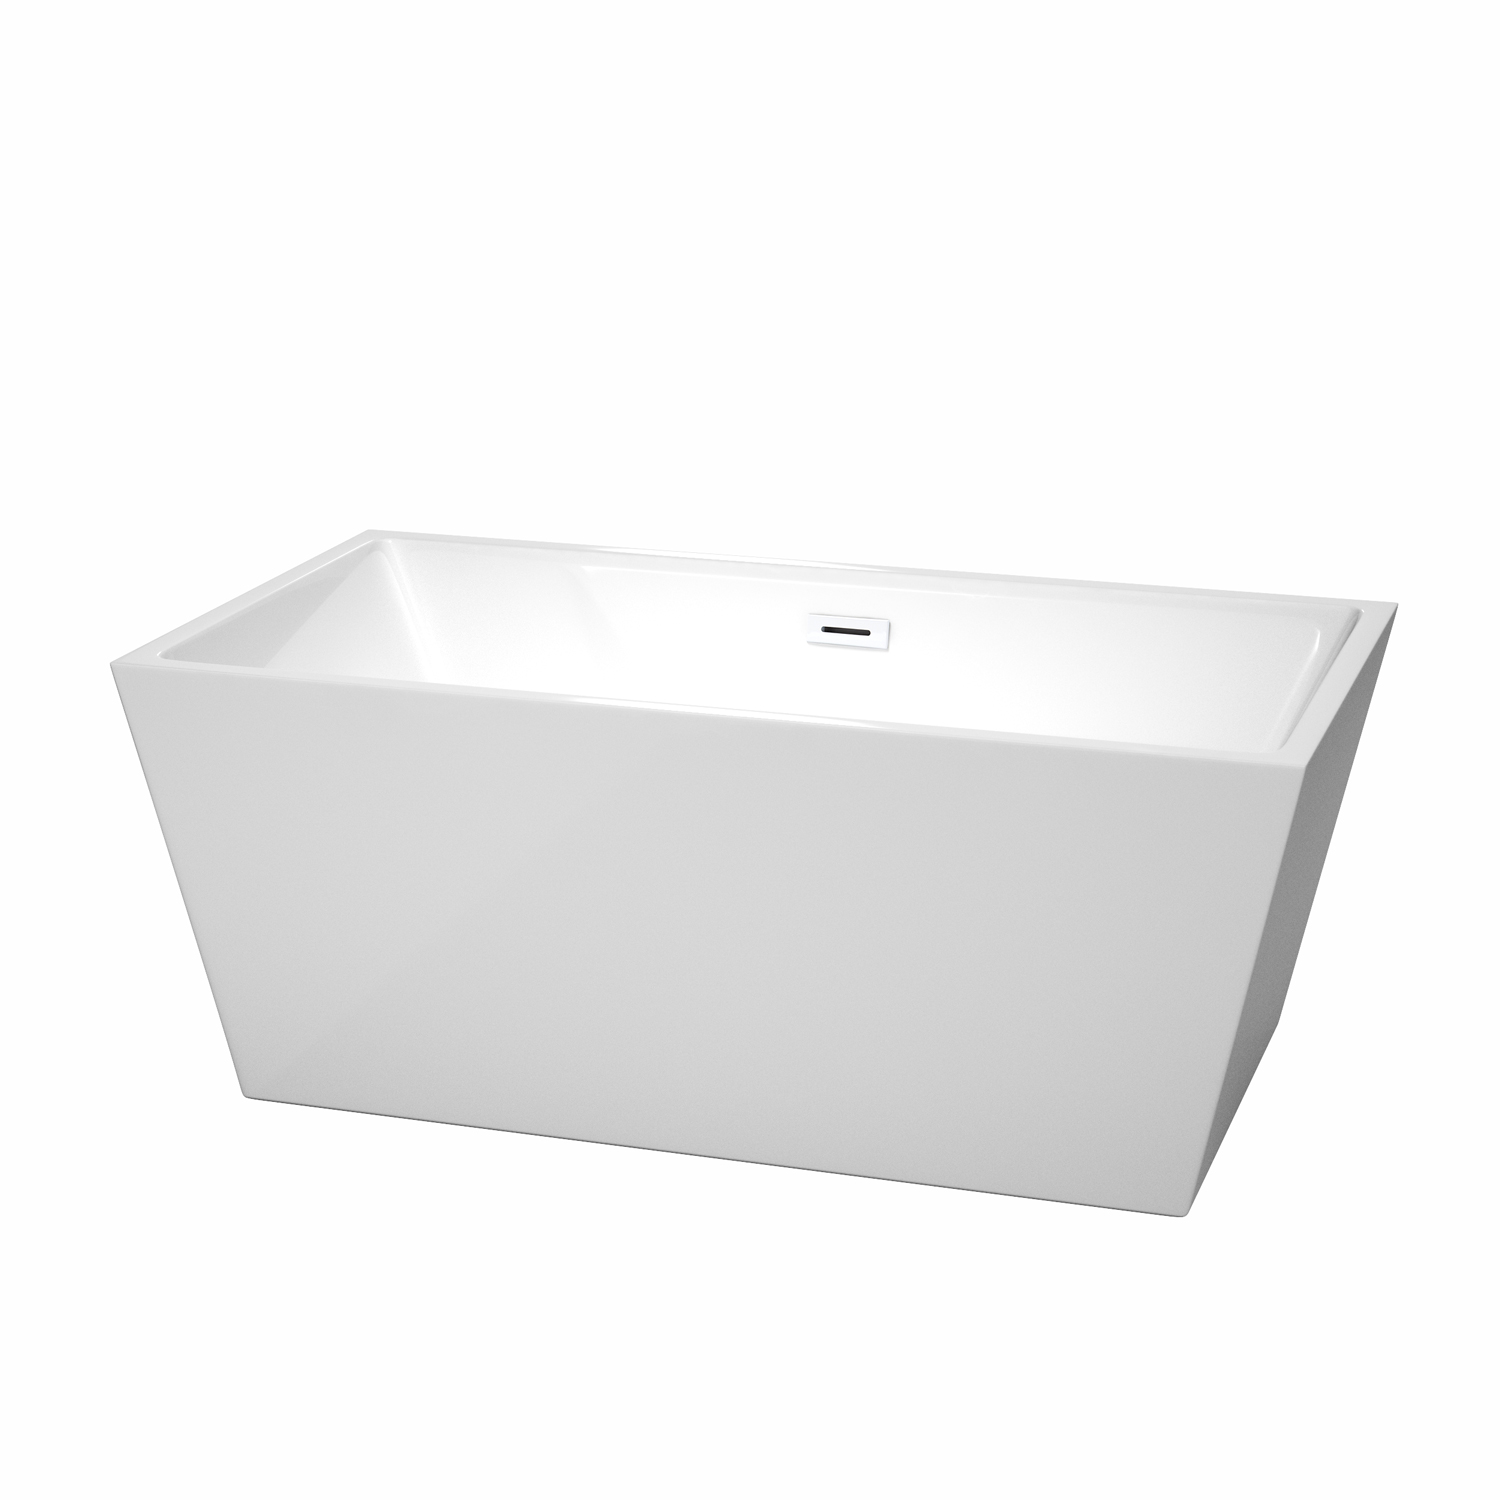 59" Freestanding Bathtub in White with Overflow Trim Finish and Shiny White Drain 